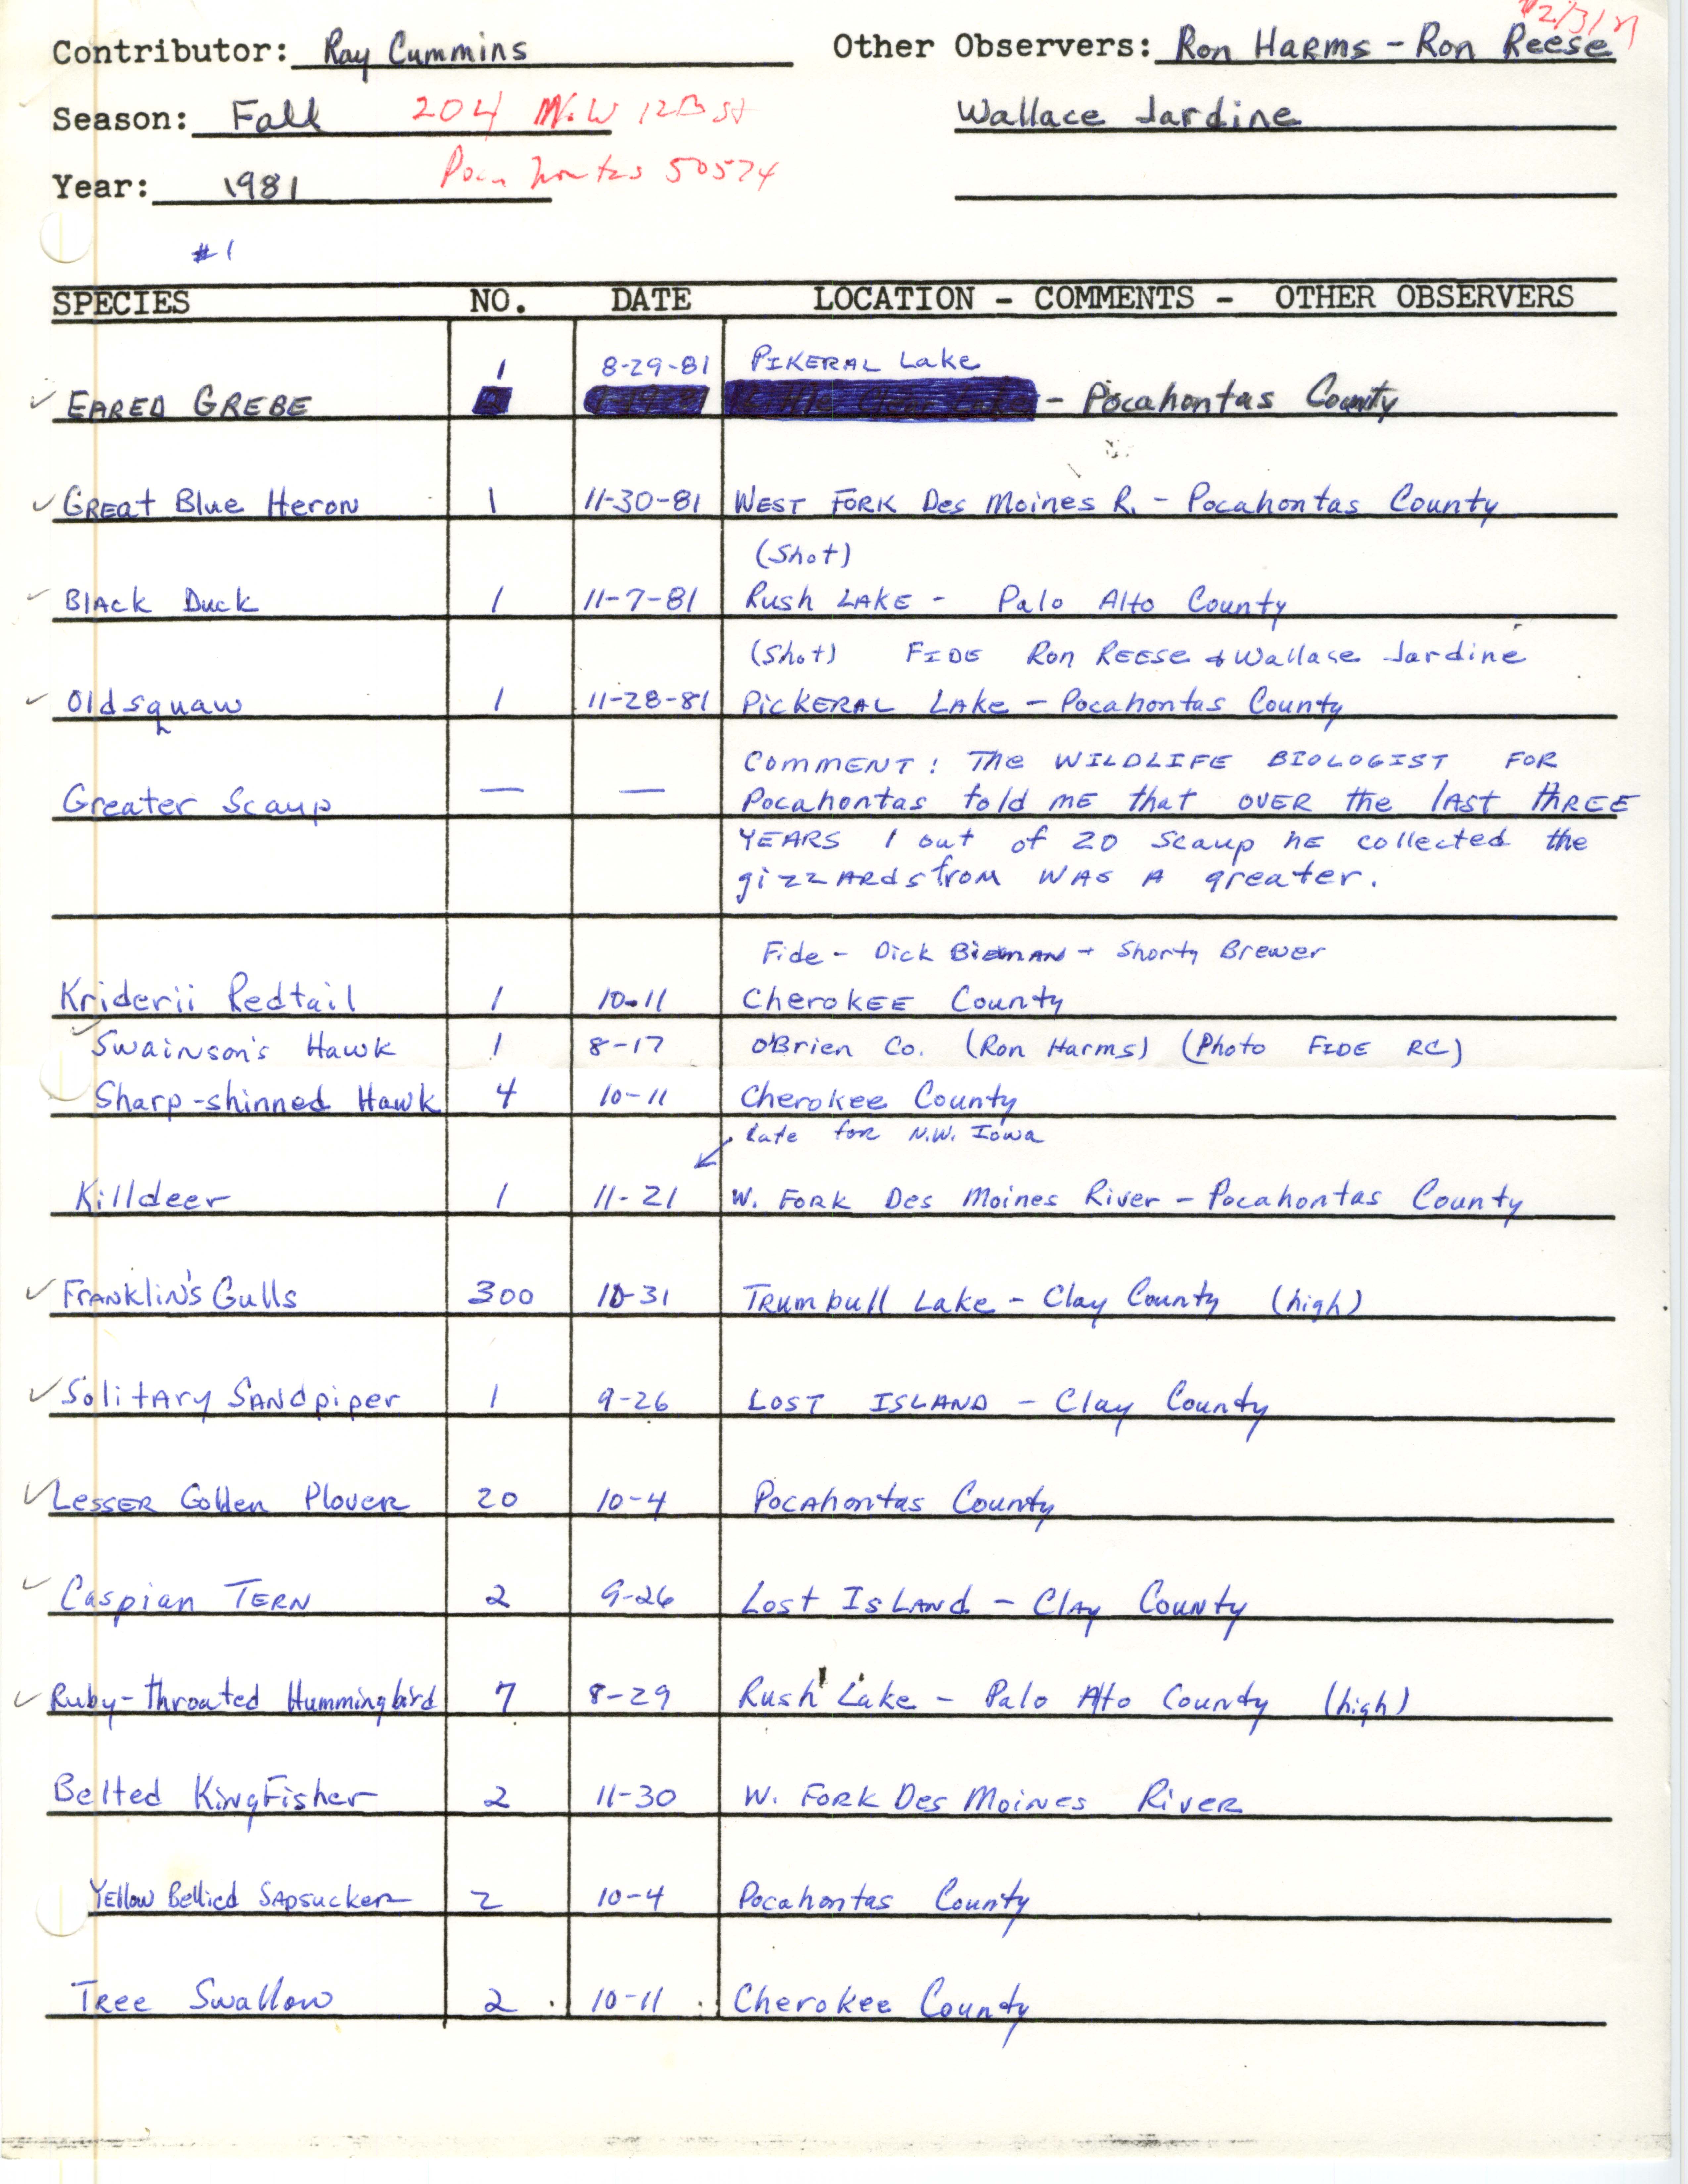 Field notes contributed by Raymond L. Cummins with verifying documentation, fall 1981